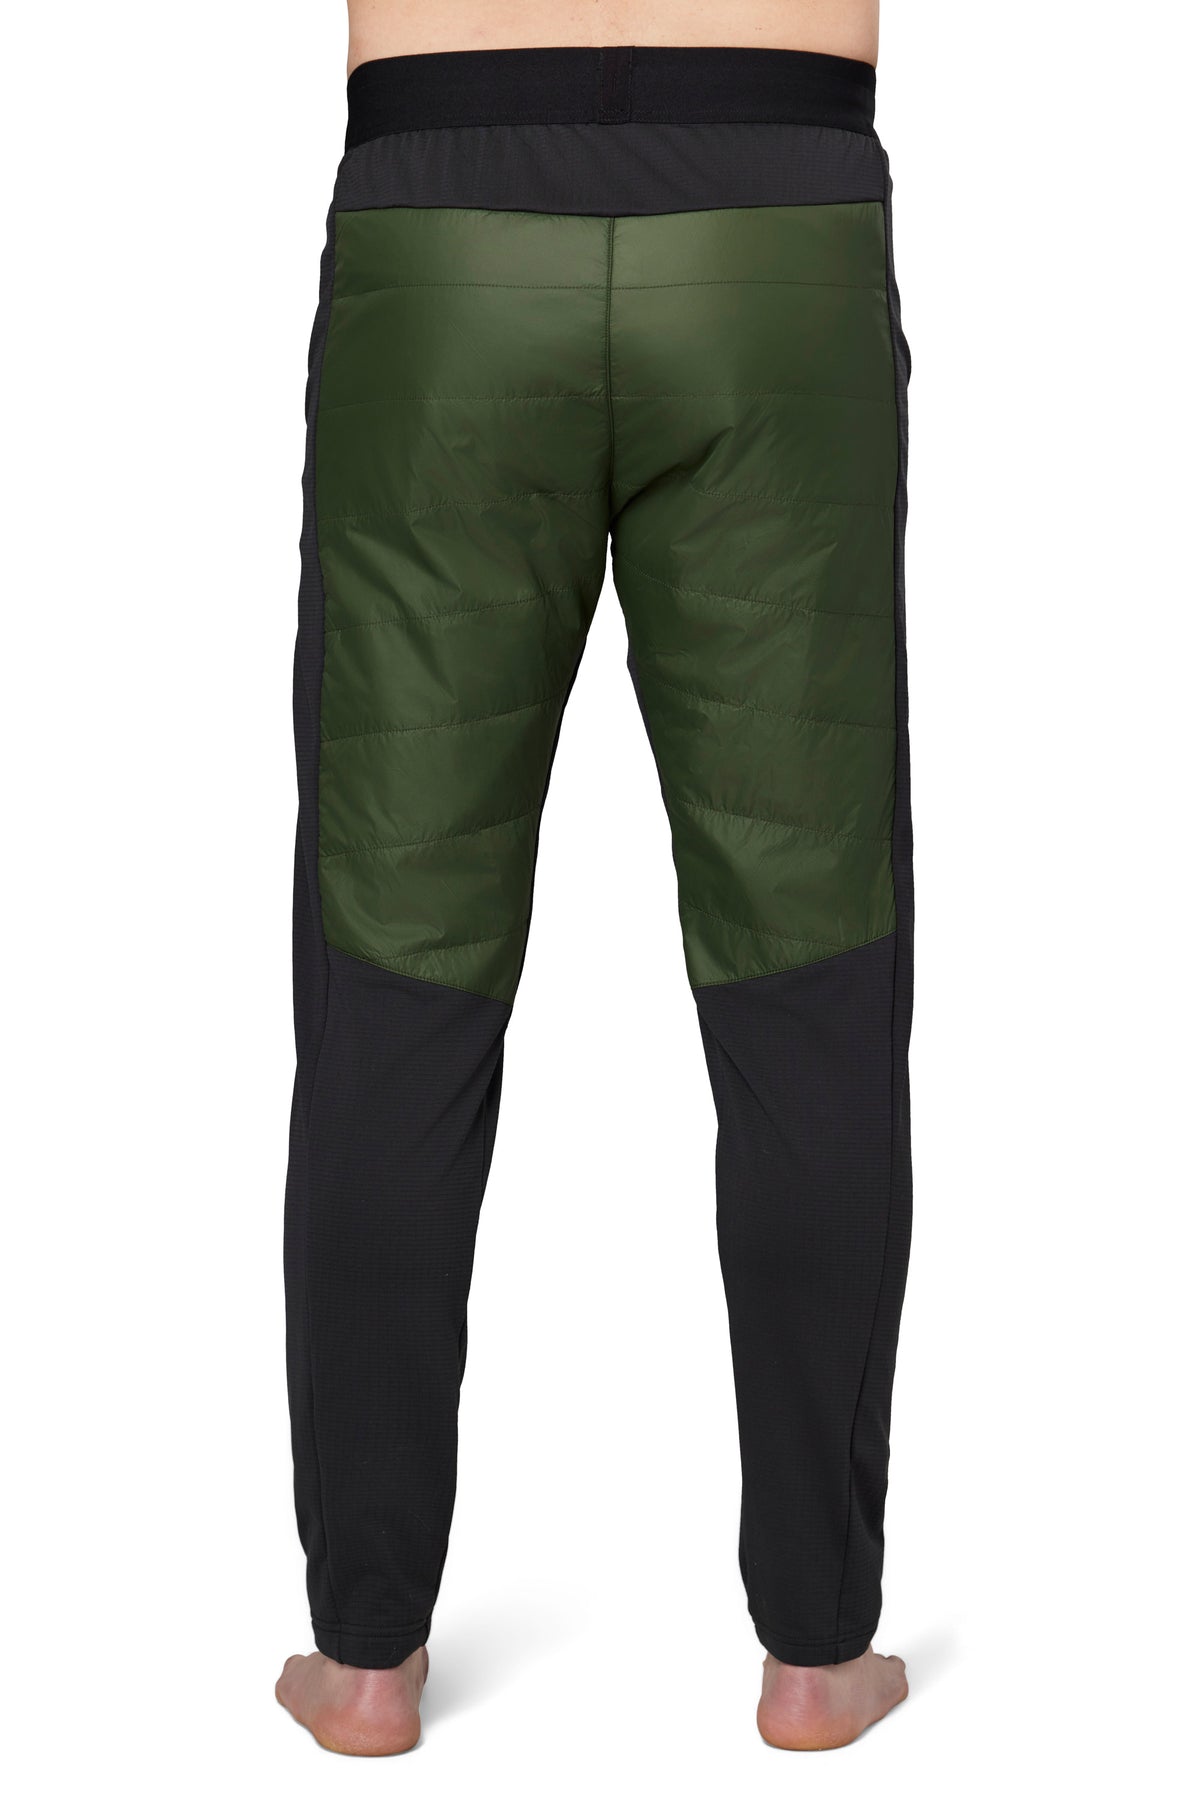 Men's Puffer Pant - Insulated Baselayers